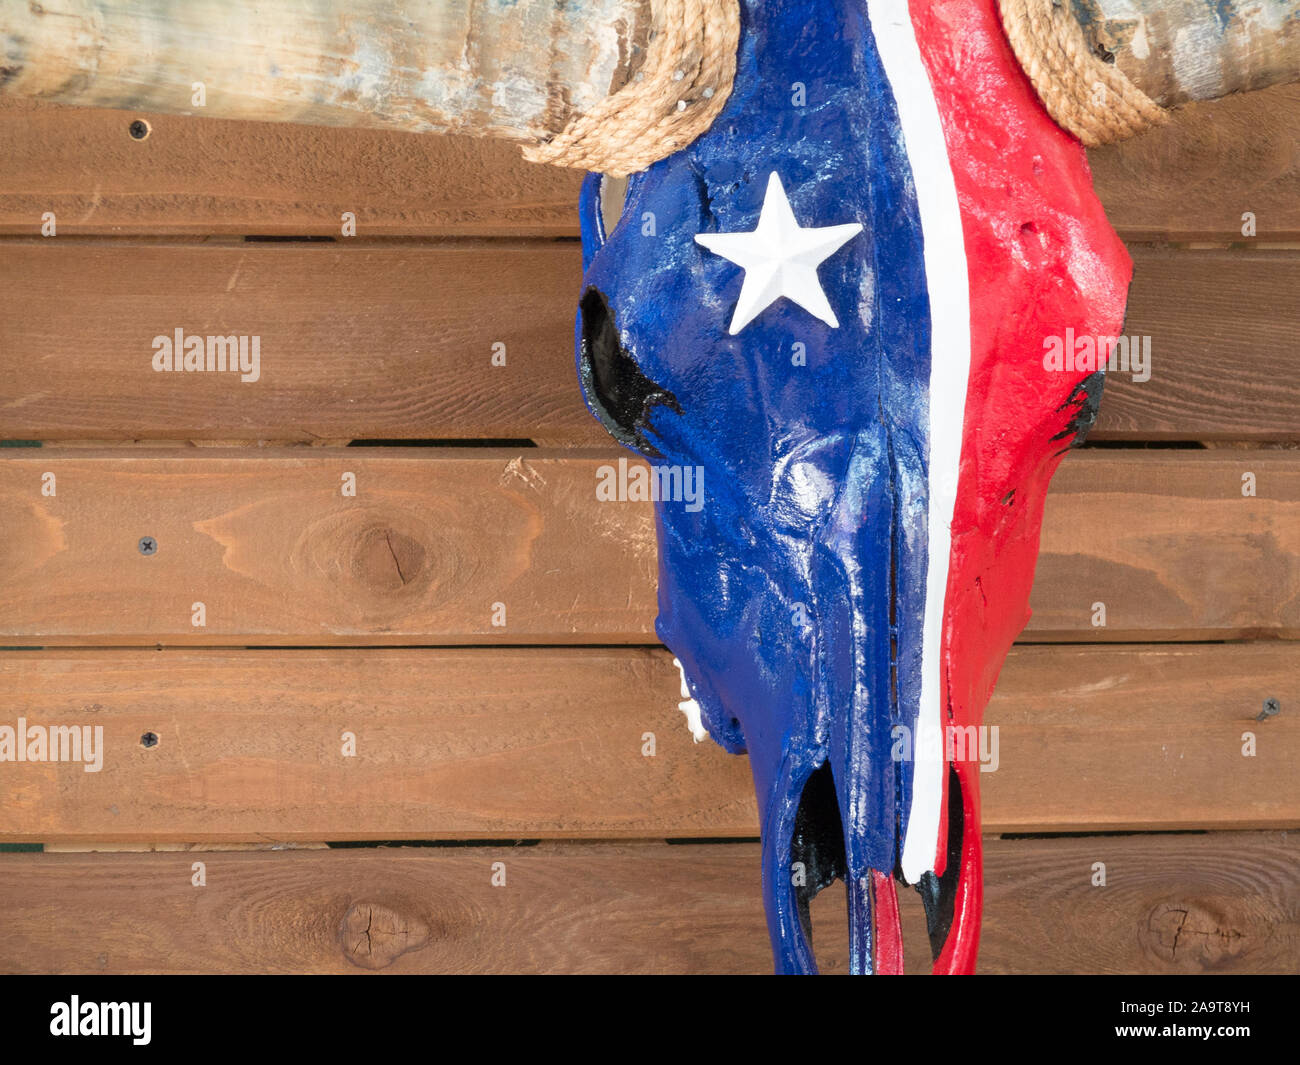 Texas Longhorn skull painted with lone star state flag and mounted on hardwood wall. Decoration for patriotic texans. Stock Photo